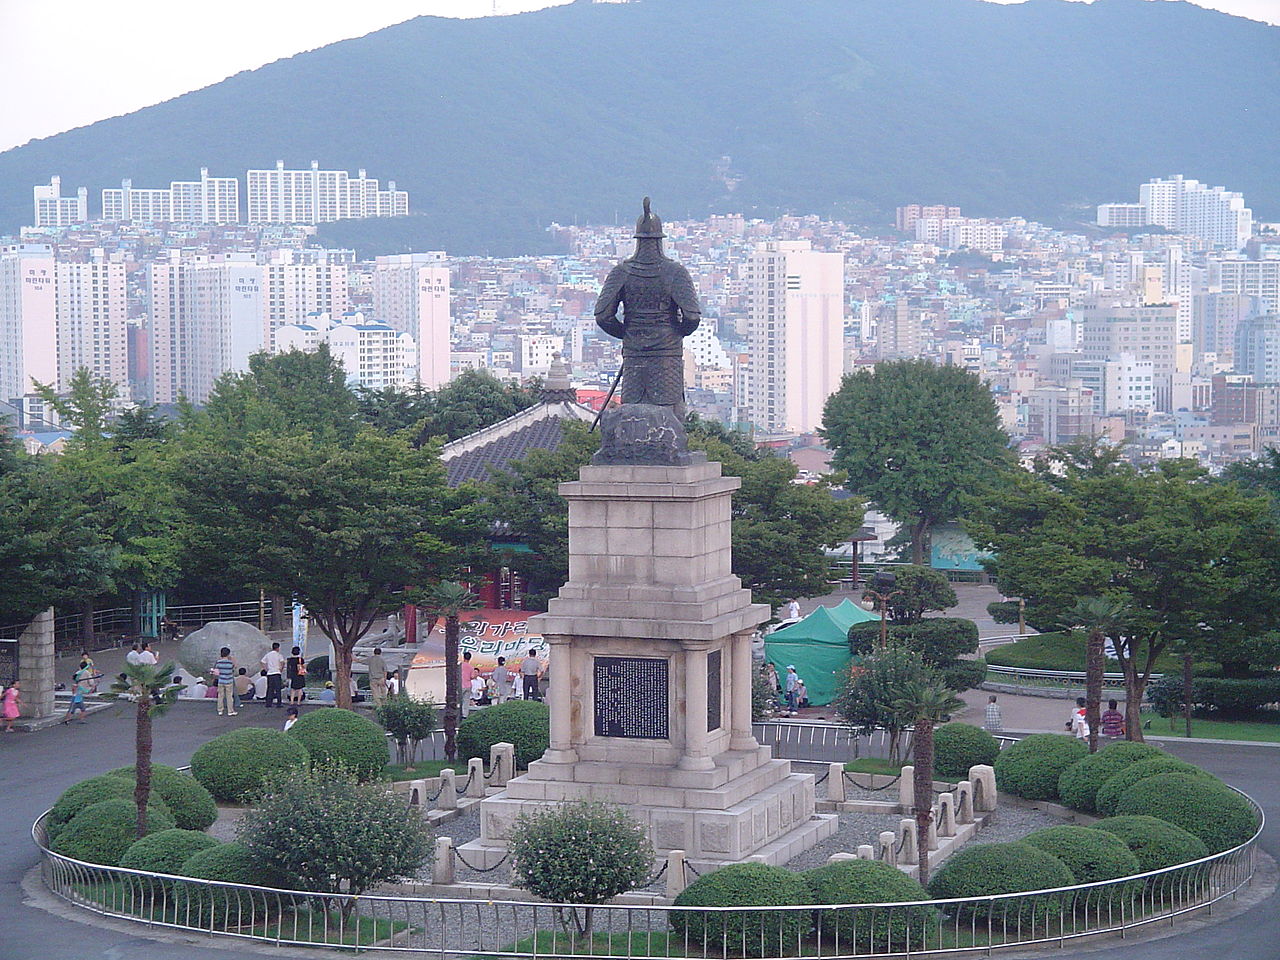 Rear view of the statue of Admiral Yi at Busan Tower, in Busan, South Korea | Stories Preschool